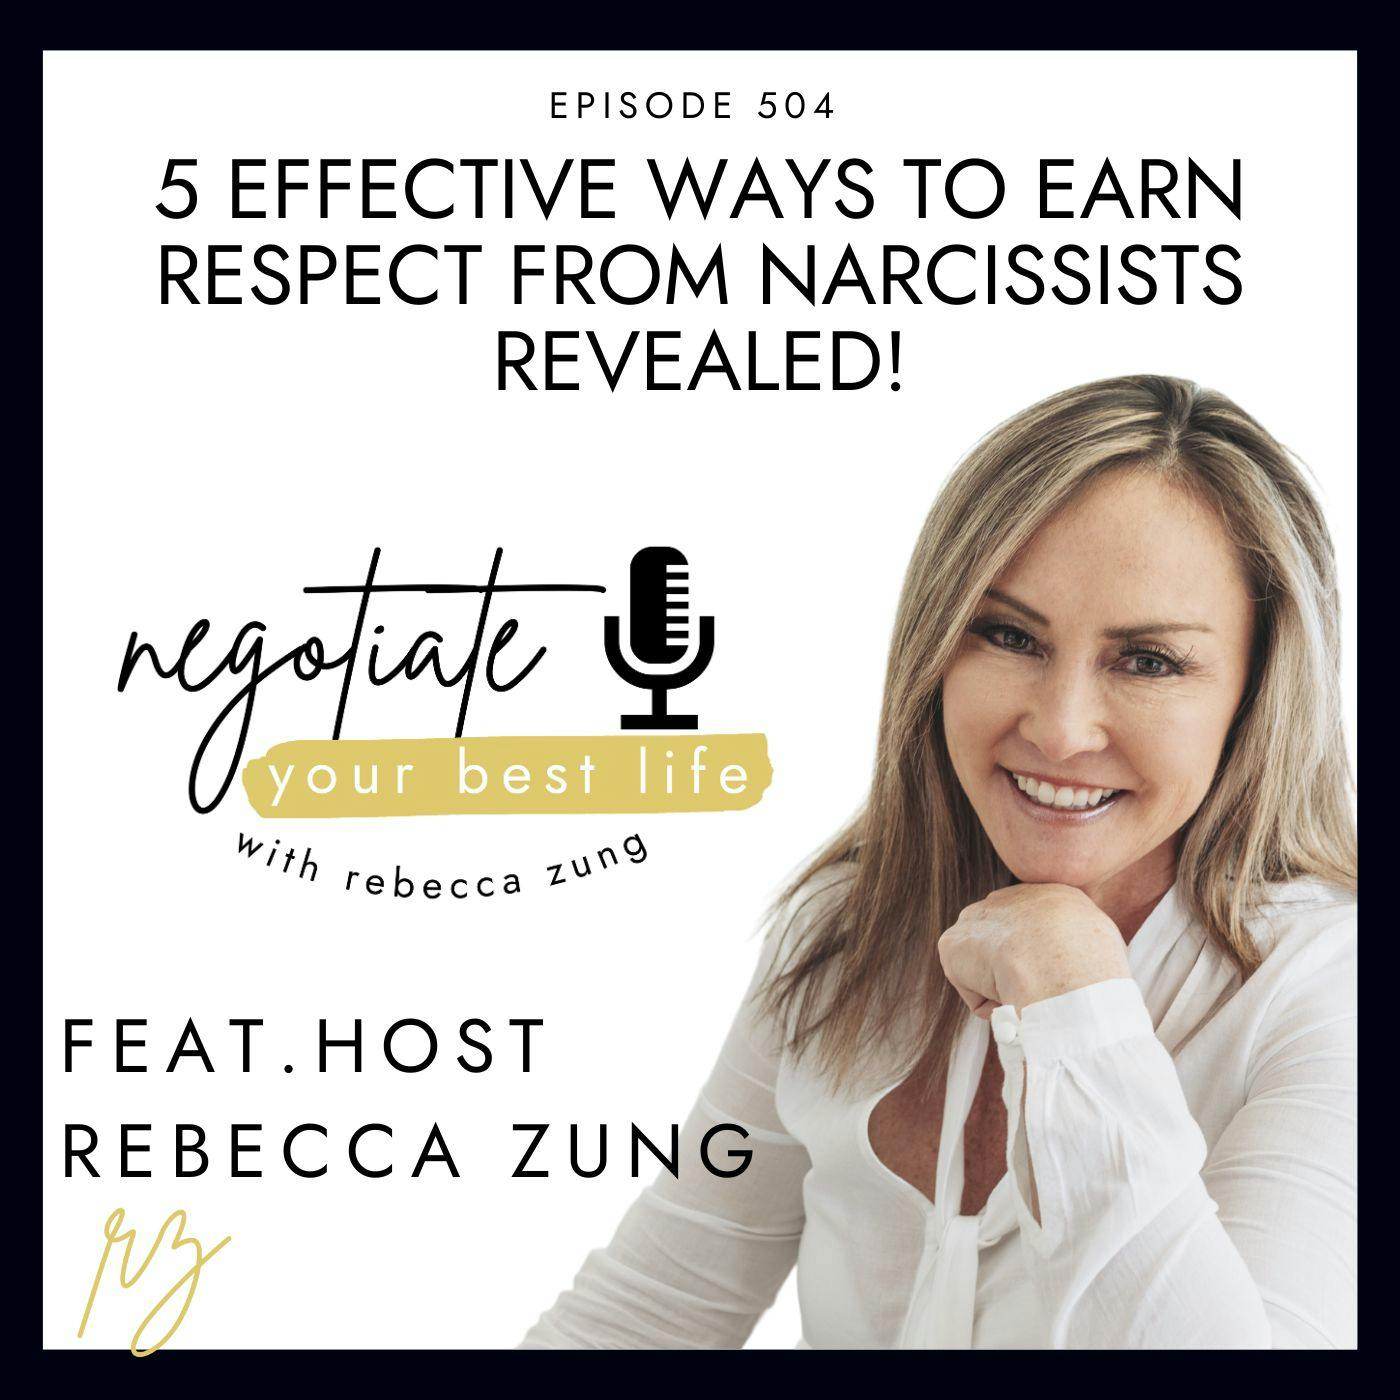 5 Effective Ways to Earn Respect from Narcissists REVEALED! with Rebecca Zung on Negotiate Your Best Life #504